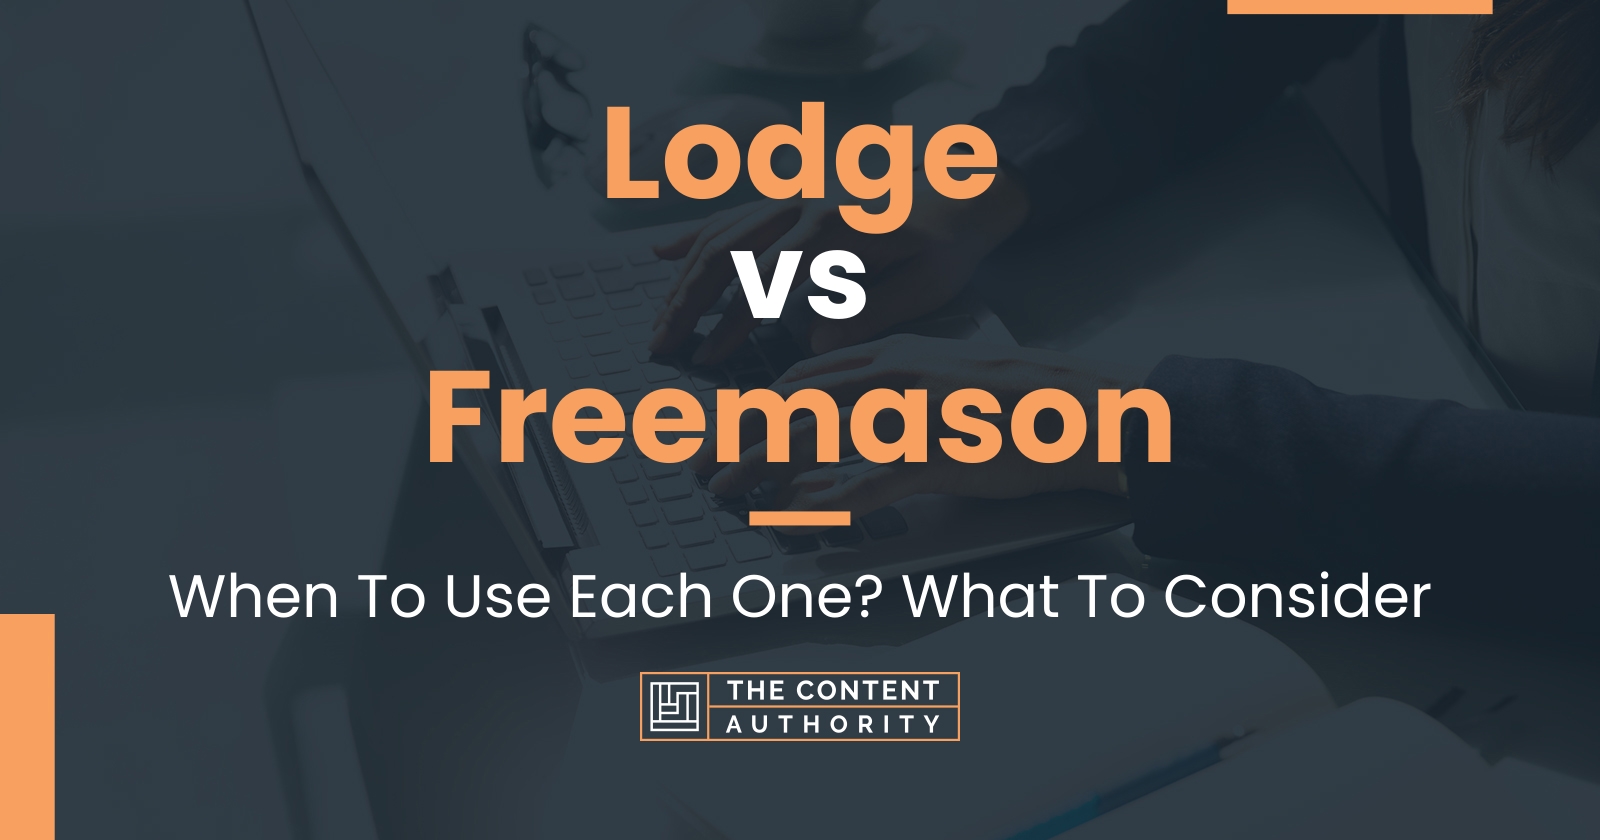 Lodge vs Freemason: When To Use Each One? What To Consider